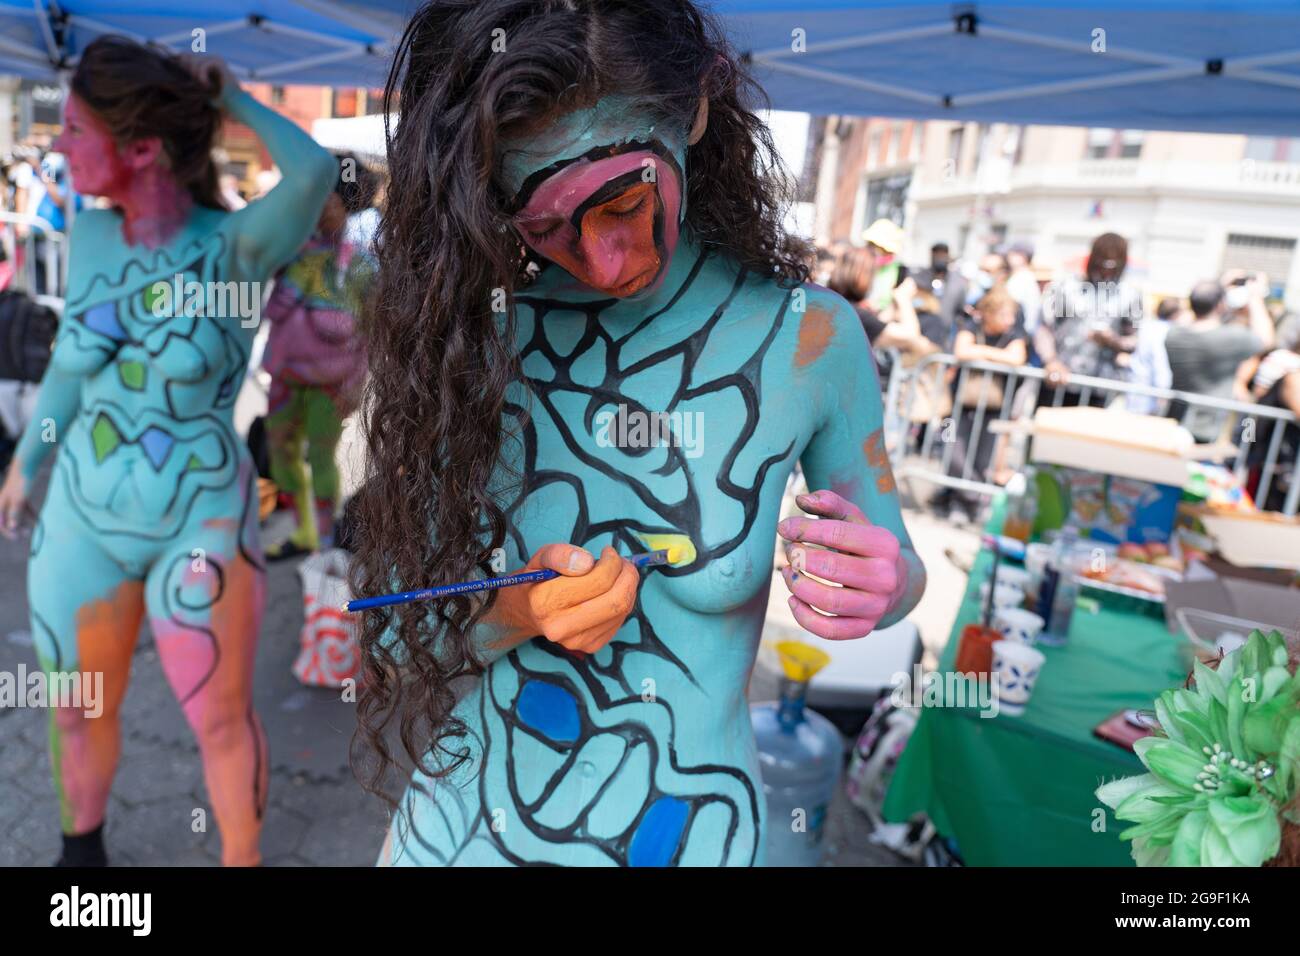 NEW YORK, NEW YORK - JULY 25: (EDITOR'S NOTE: Image Contains Nudity) Model  Shira paints herself during the 8th annual 'NYC Body Painting Day' in Union  Square on July 25, 2021 in